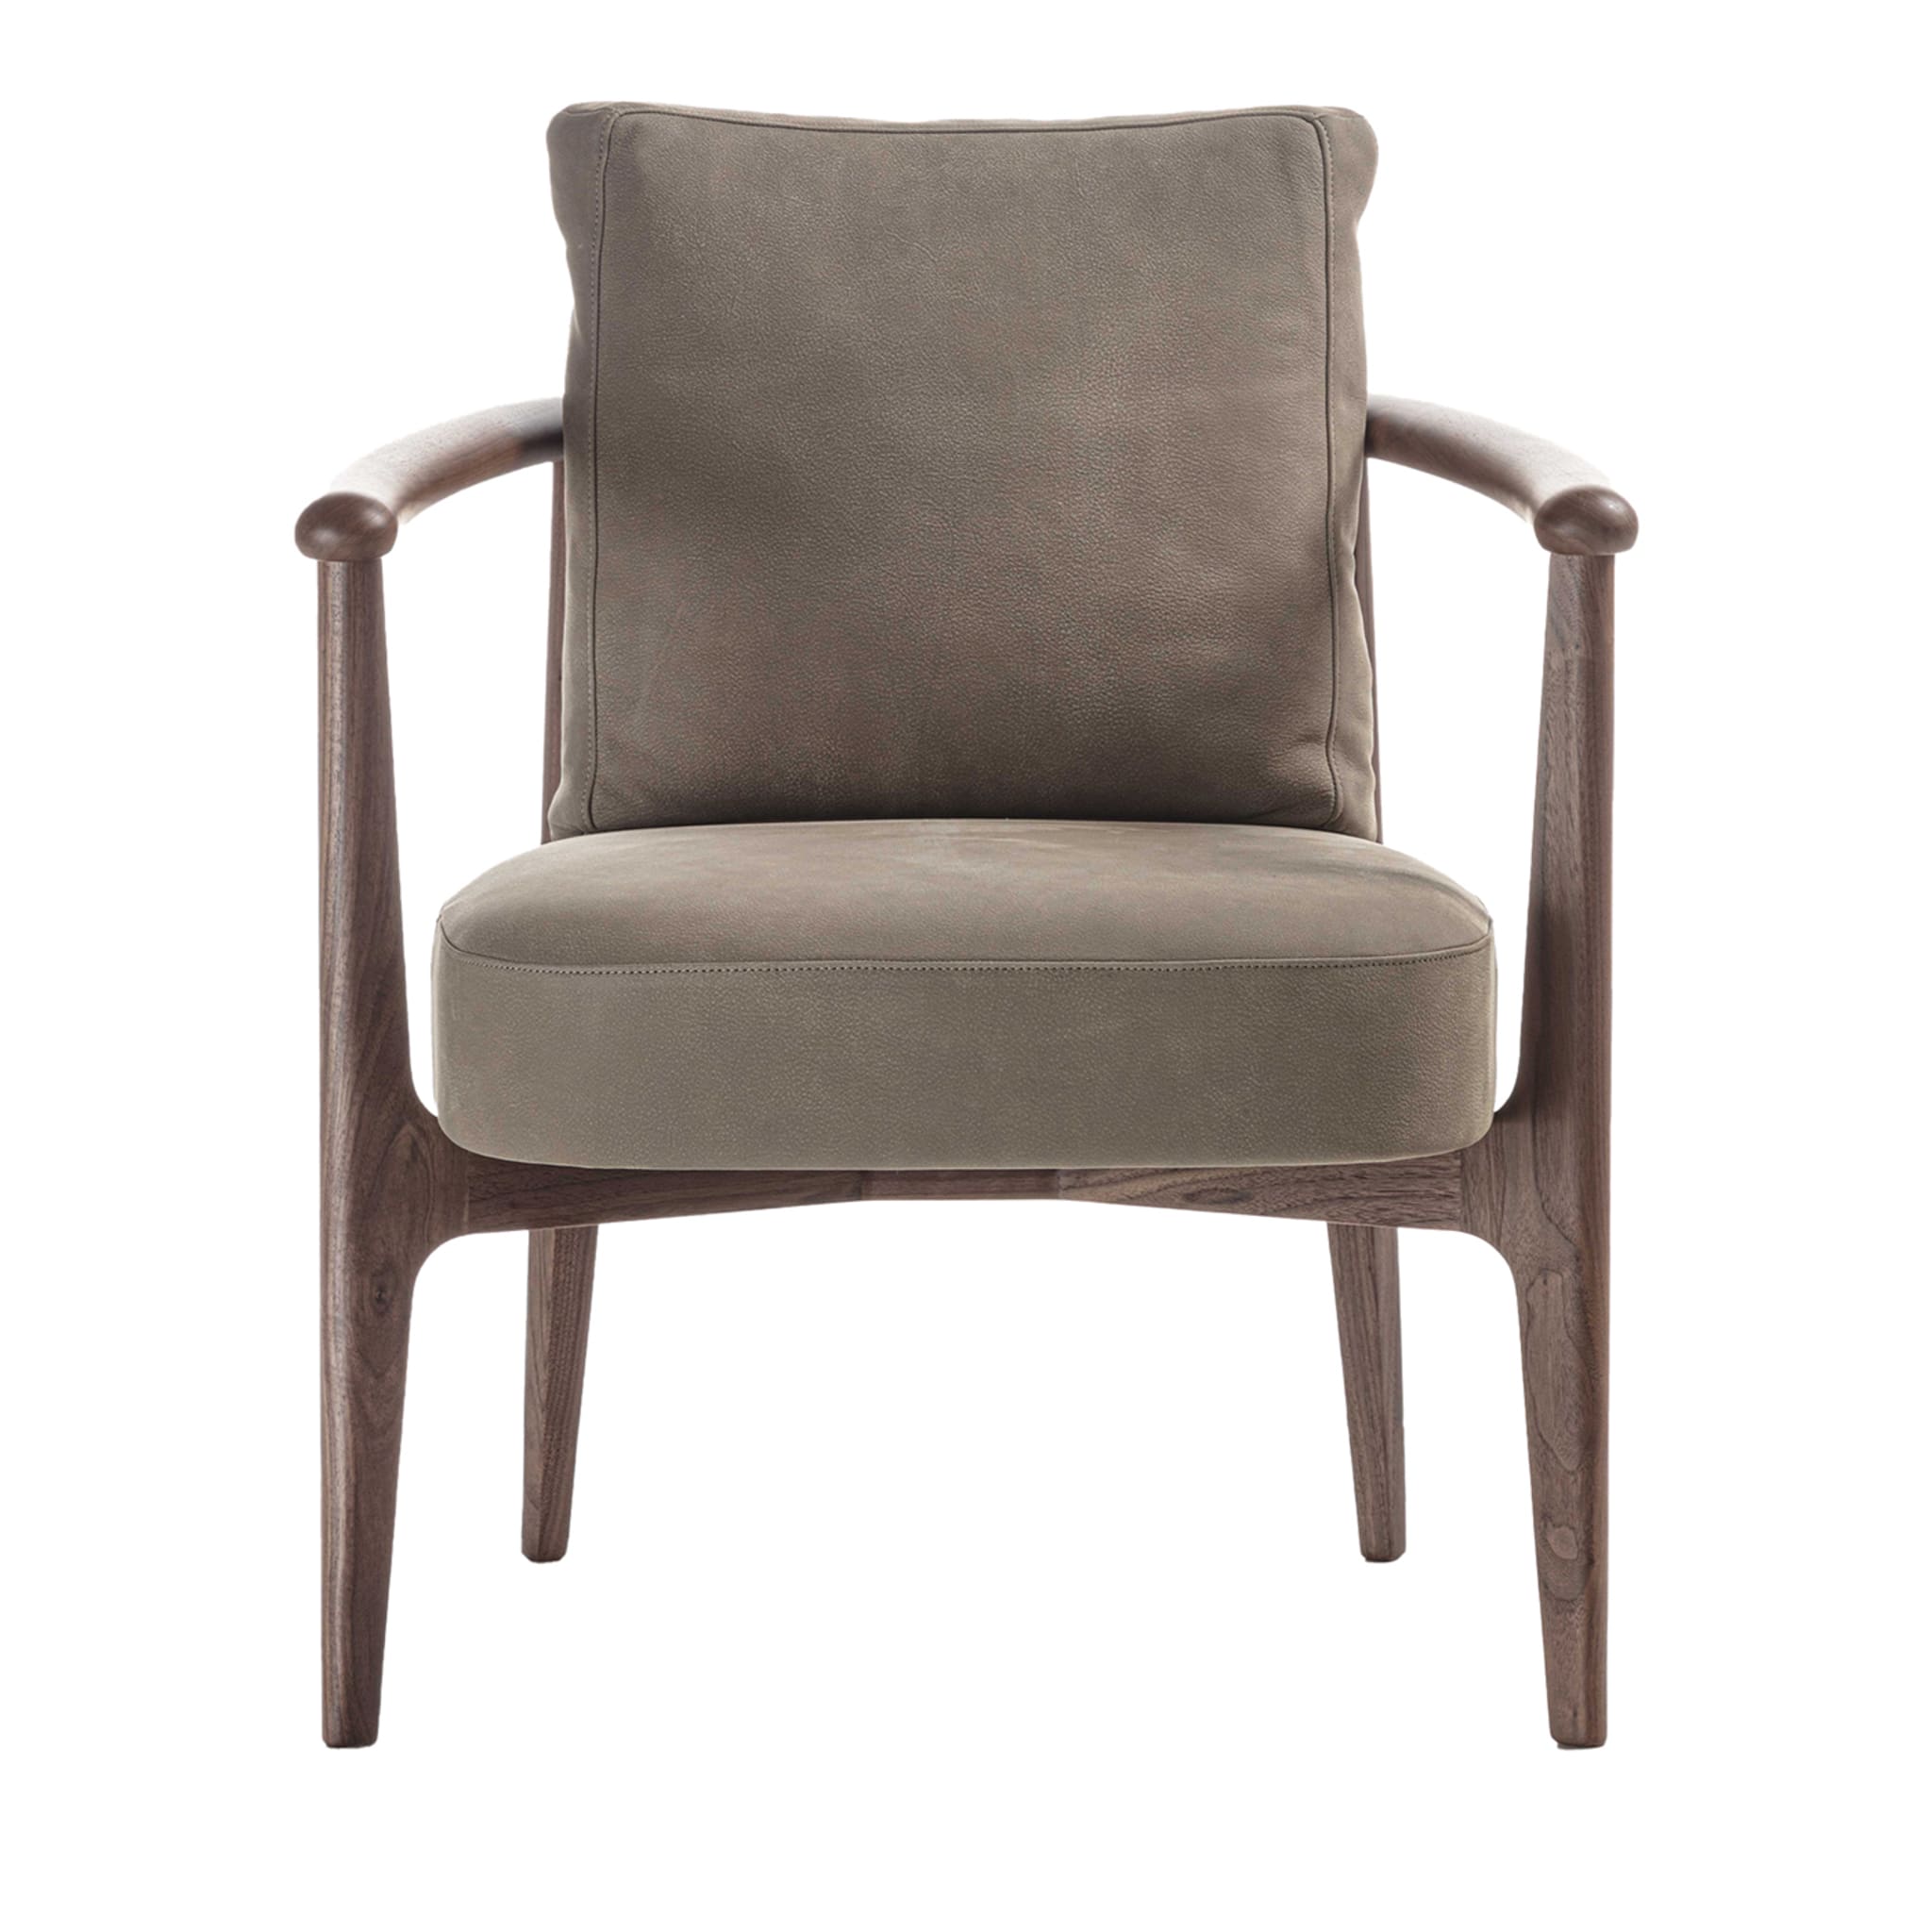 Greta Canaletto Walnut & Gray Leather Lounge Chair With Arms - Main view